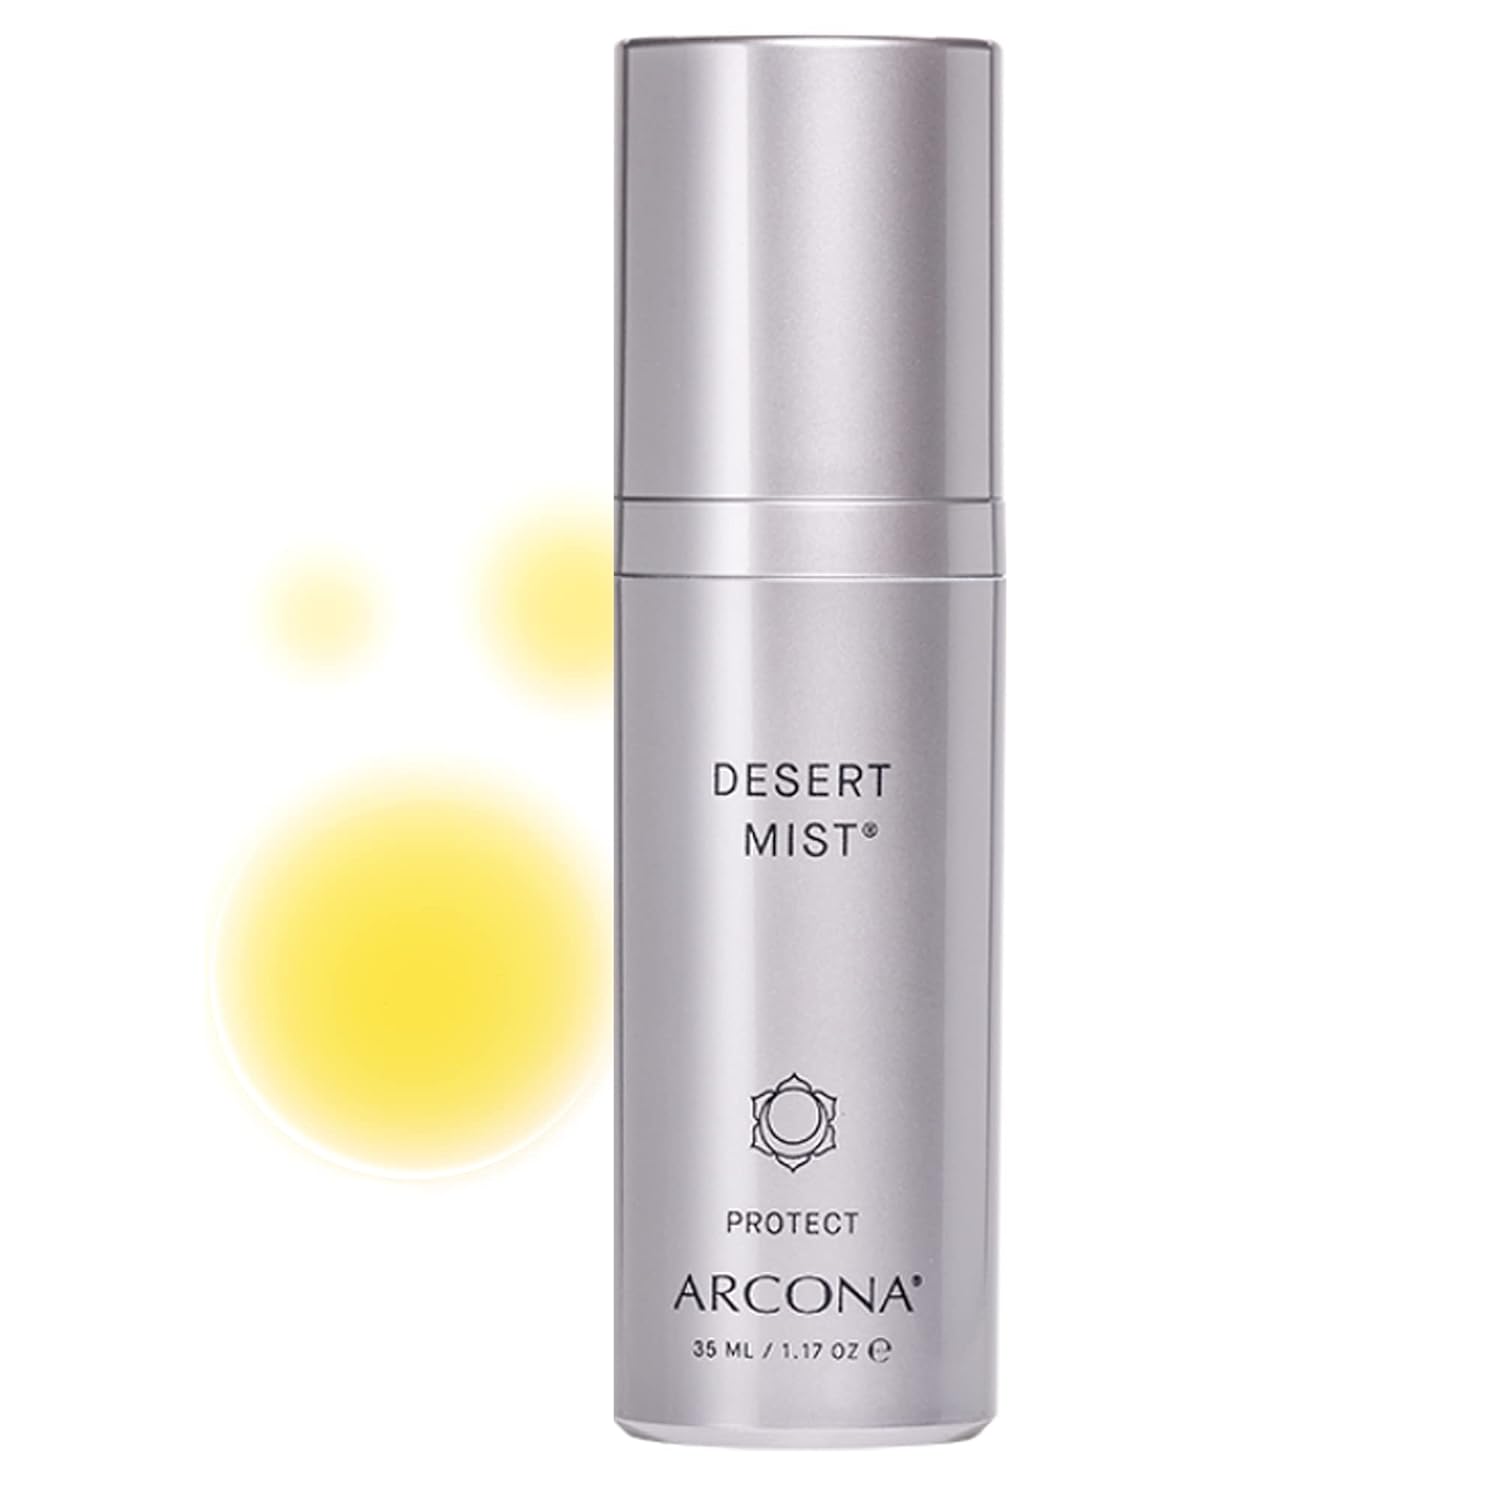 ARCONA Desert Mist - Protective Barrier Serum with Vitamin C, Vitamin E + Glycerin - Retains Skin's Moisture + Protects - 1.17 . Made In The USA